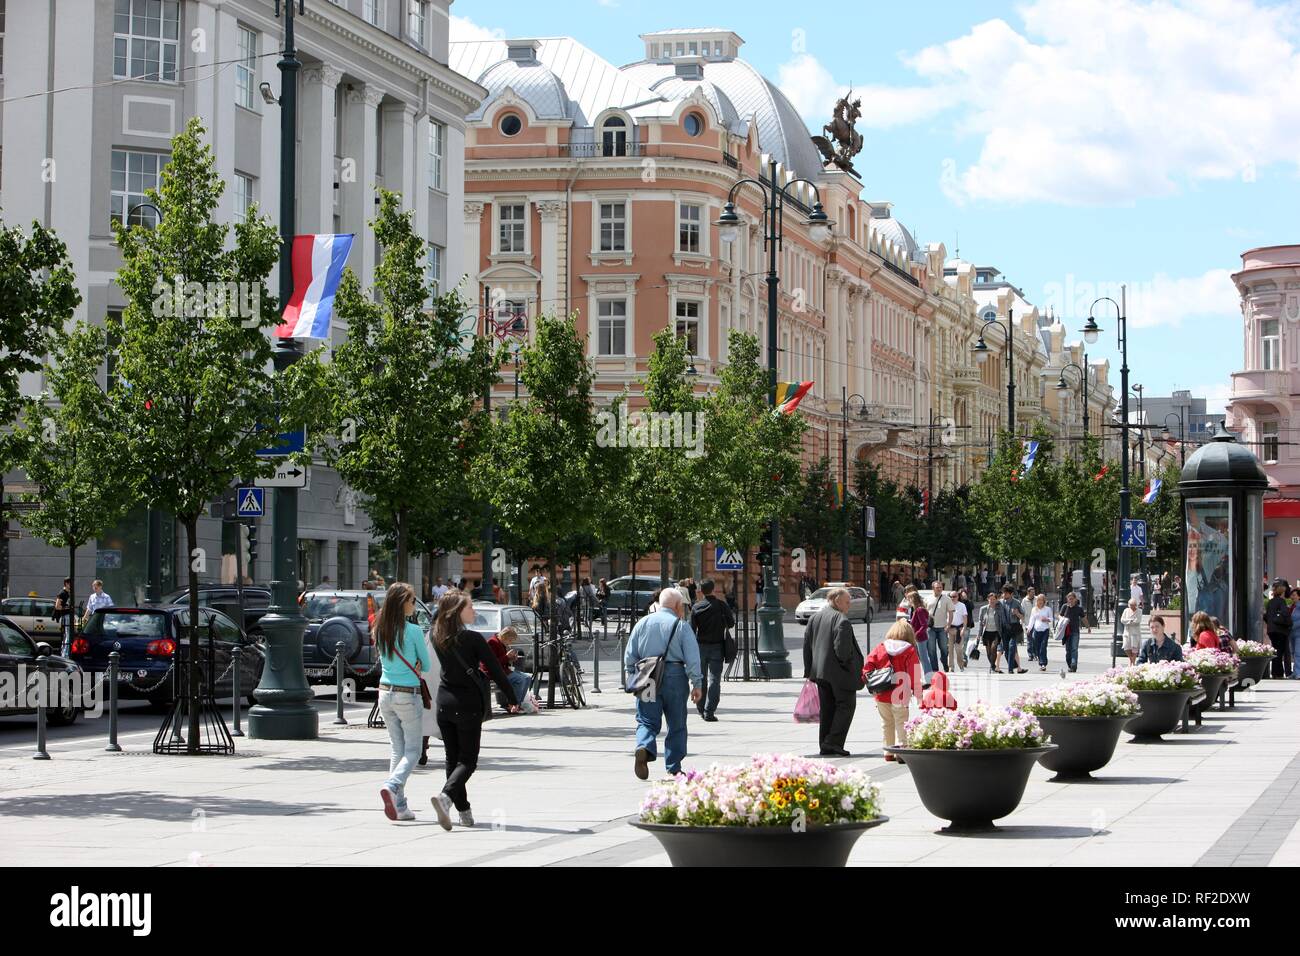 Gedimino Prospektas, largest shopping and pedestrian street in the city center, with many businesses, fashion shops Stock Photo